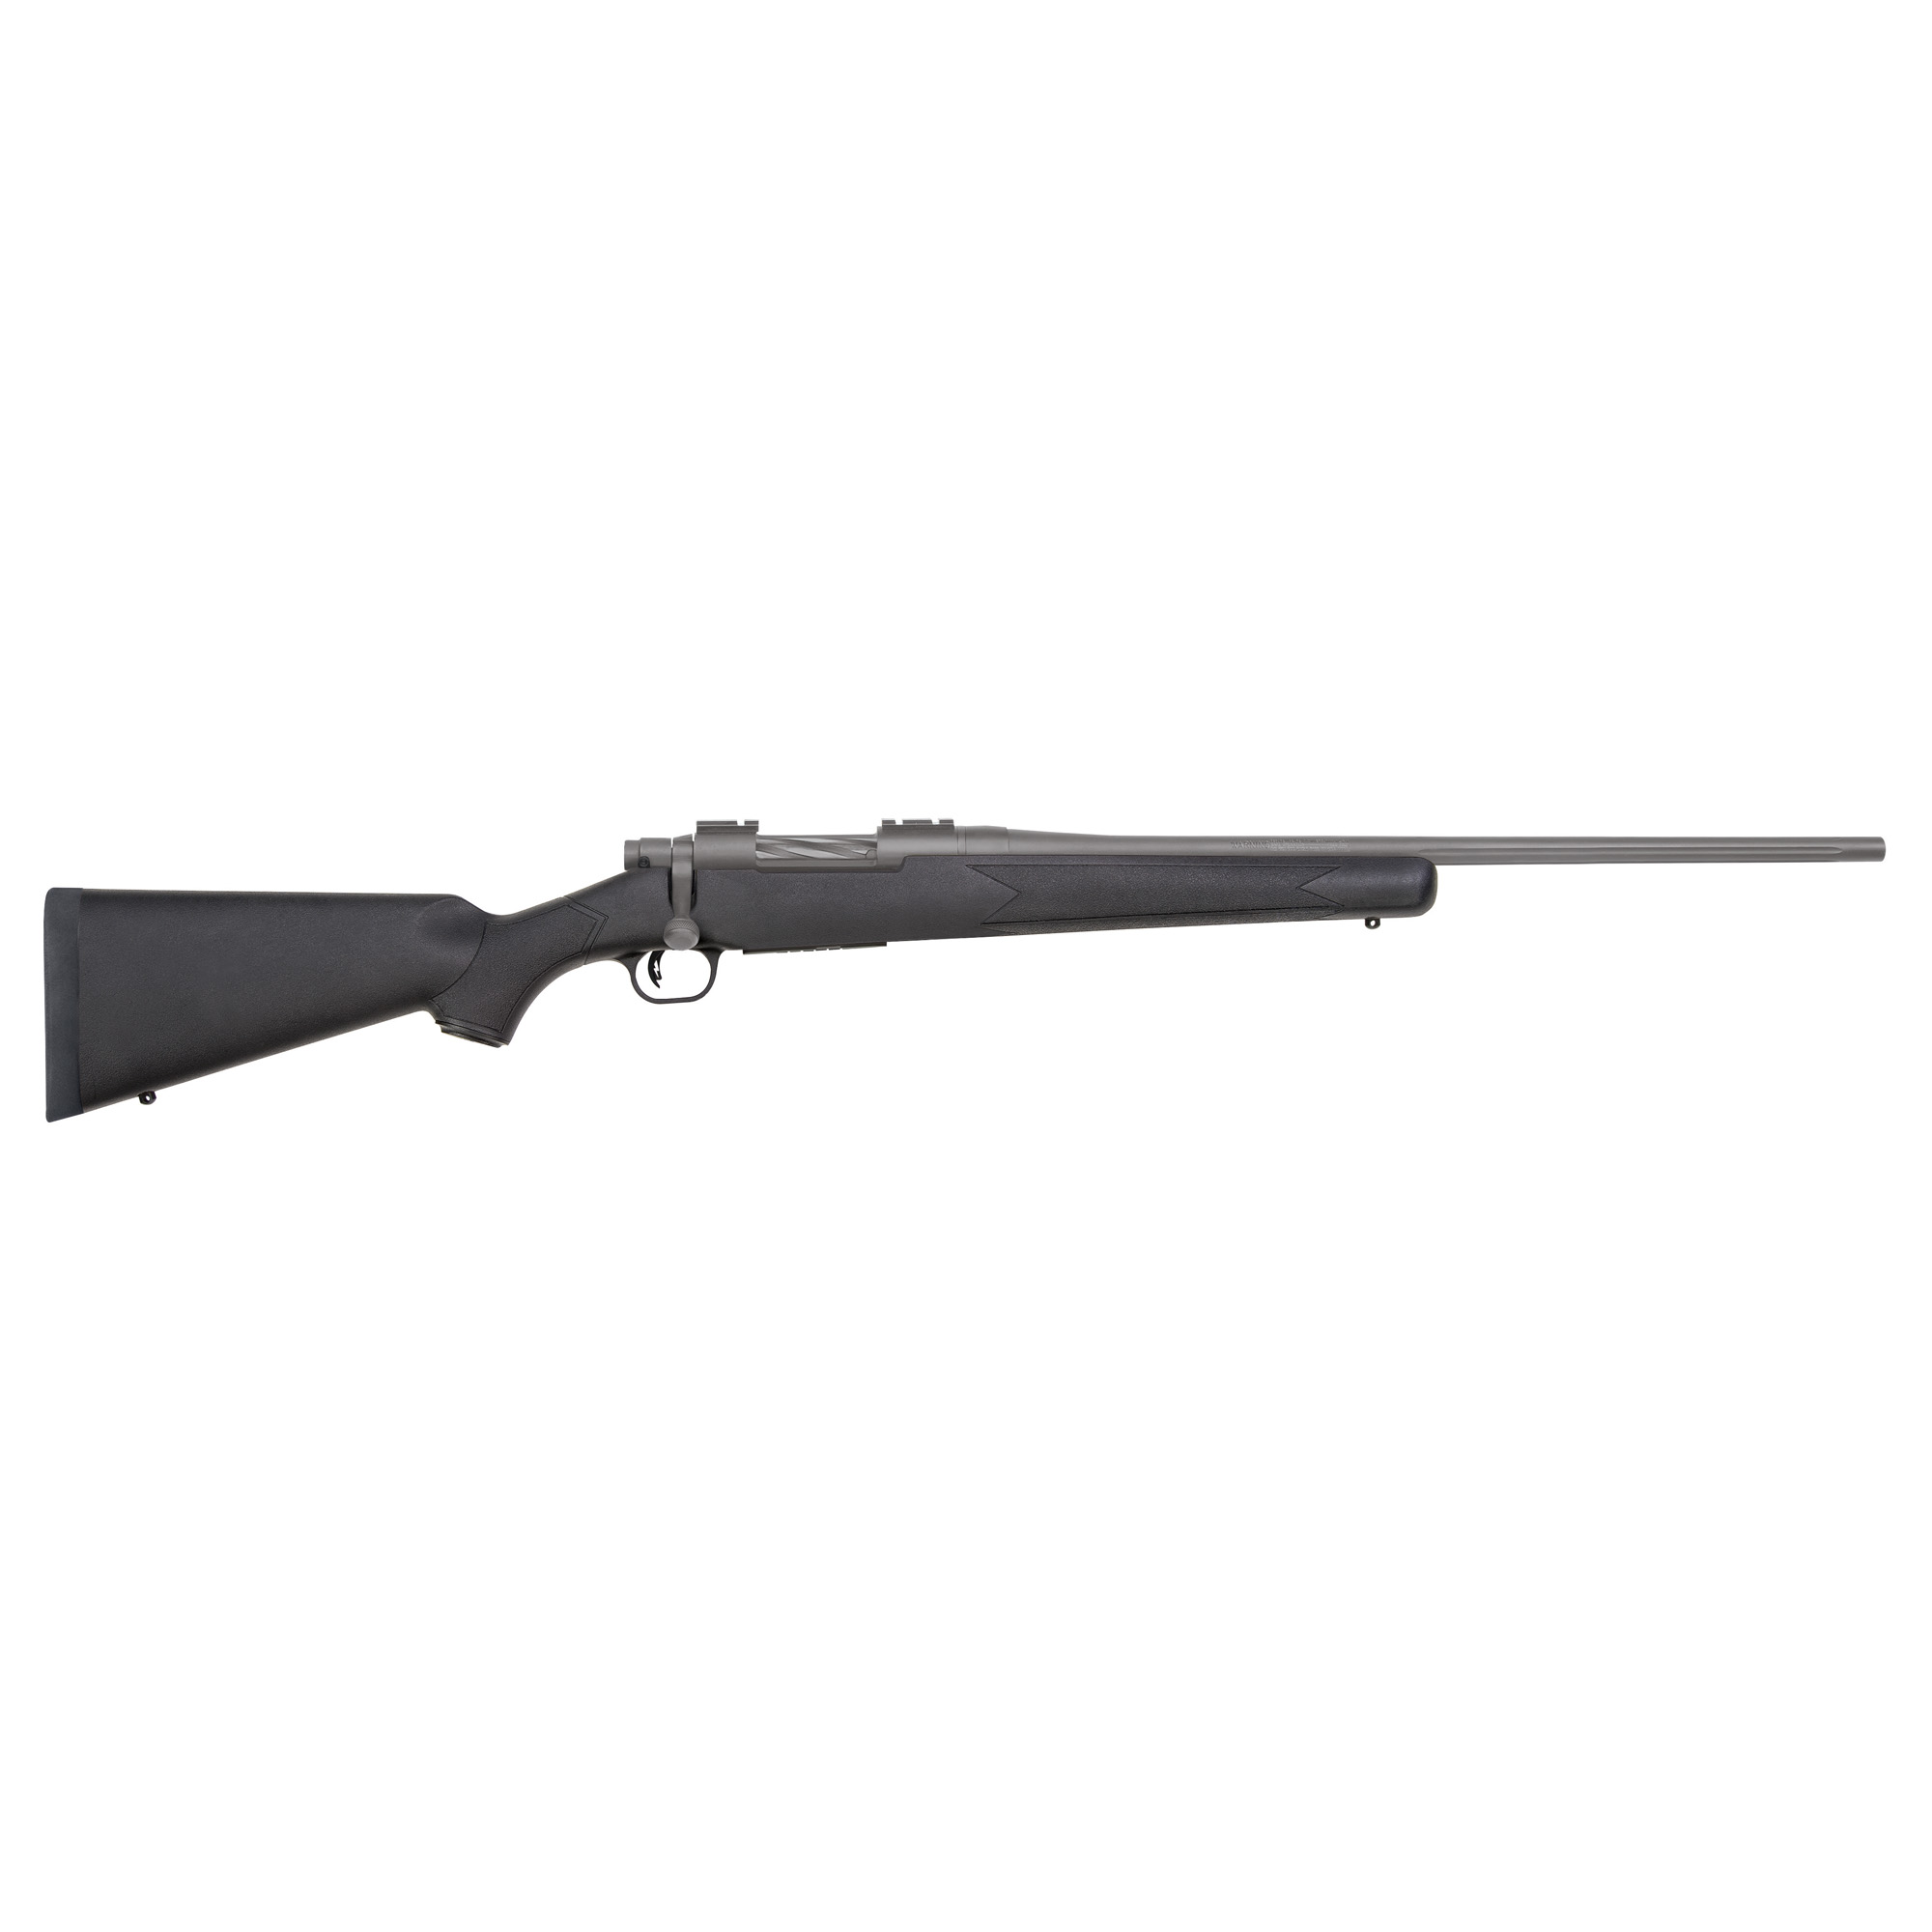 MOSSBERG PATRIOT STS 22 308WIN 4RD